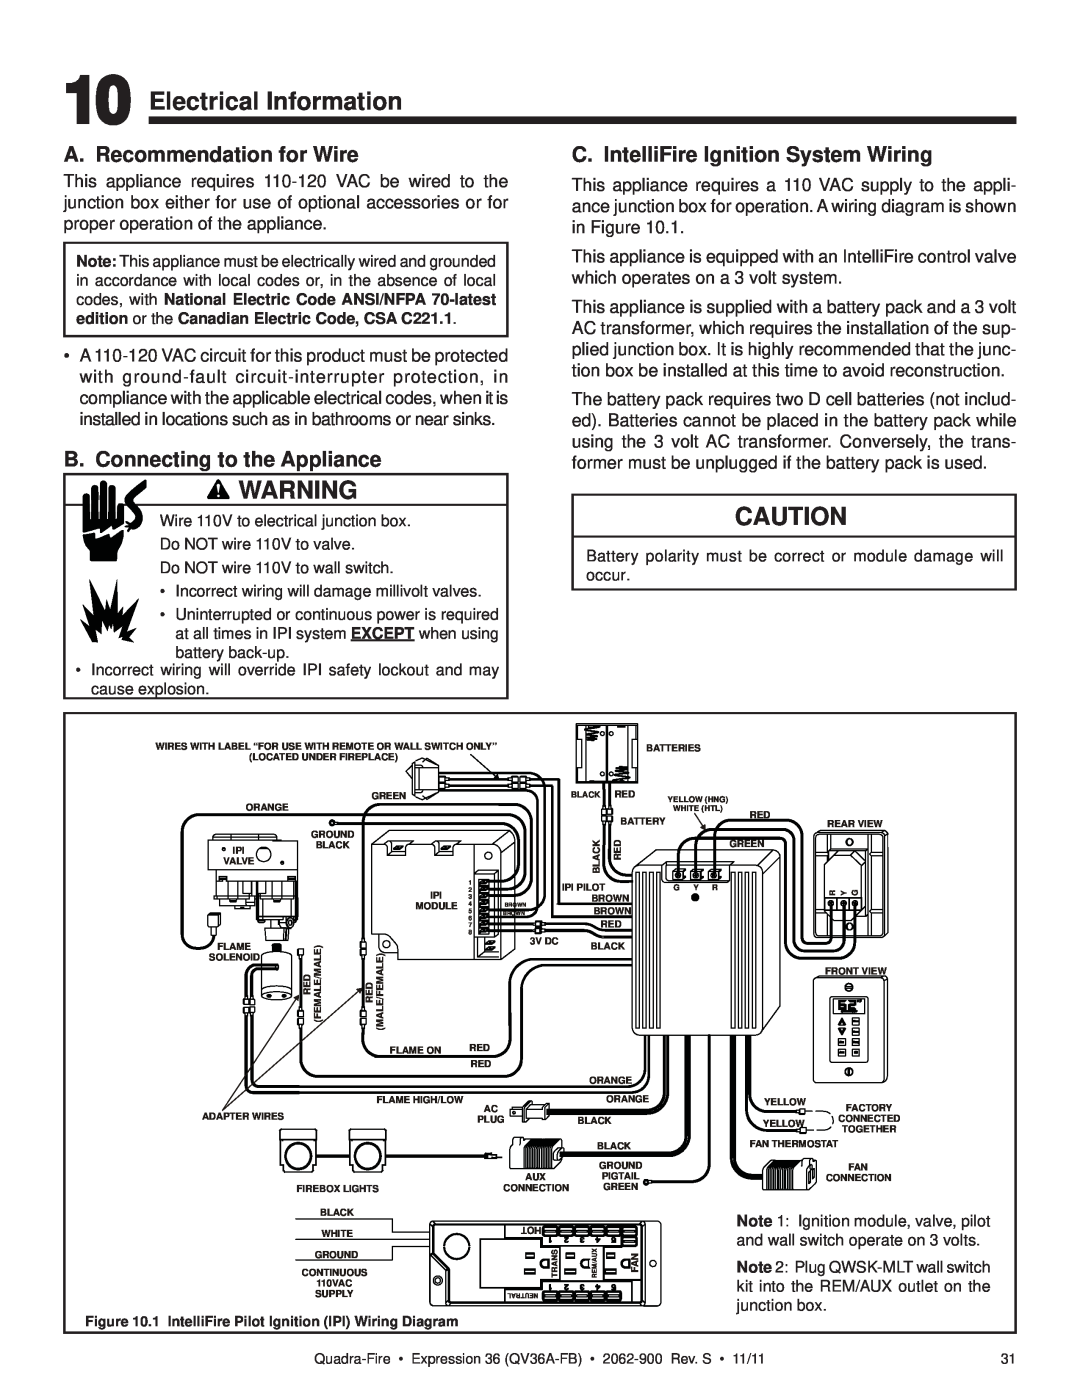 Quadra-Fire QV36A-FB owner manual Electrical Information, A. Recommendation for Wire, B. Connecting to the Appliance 